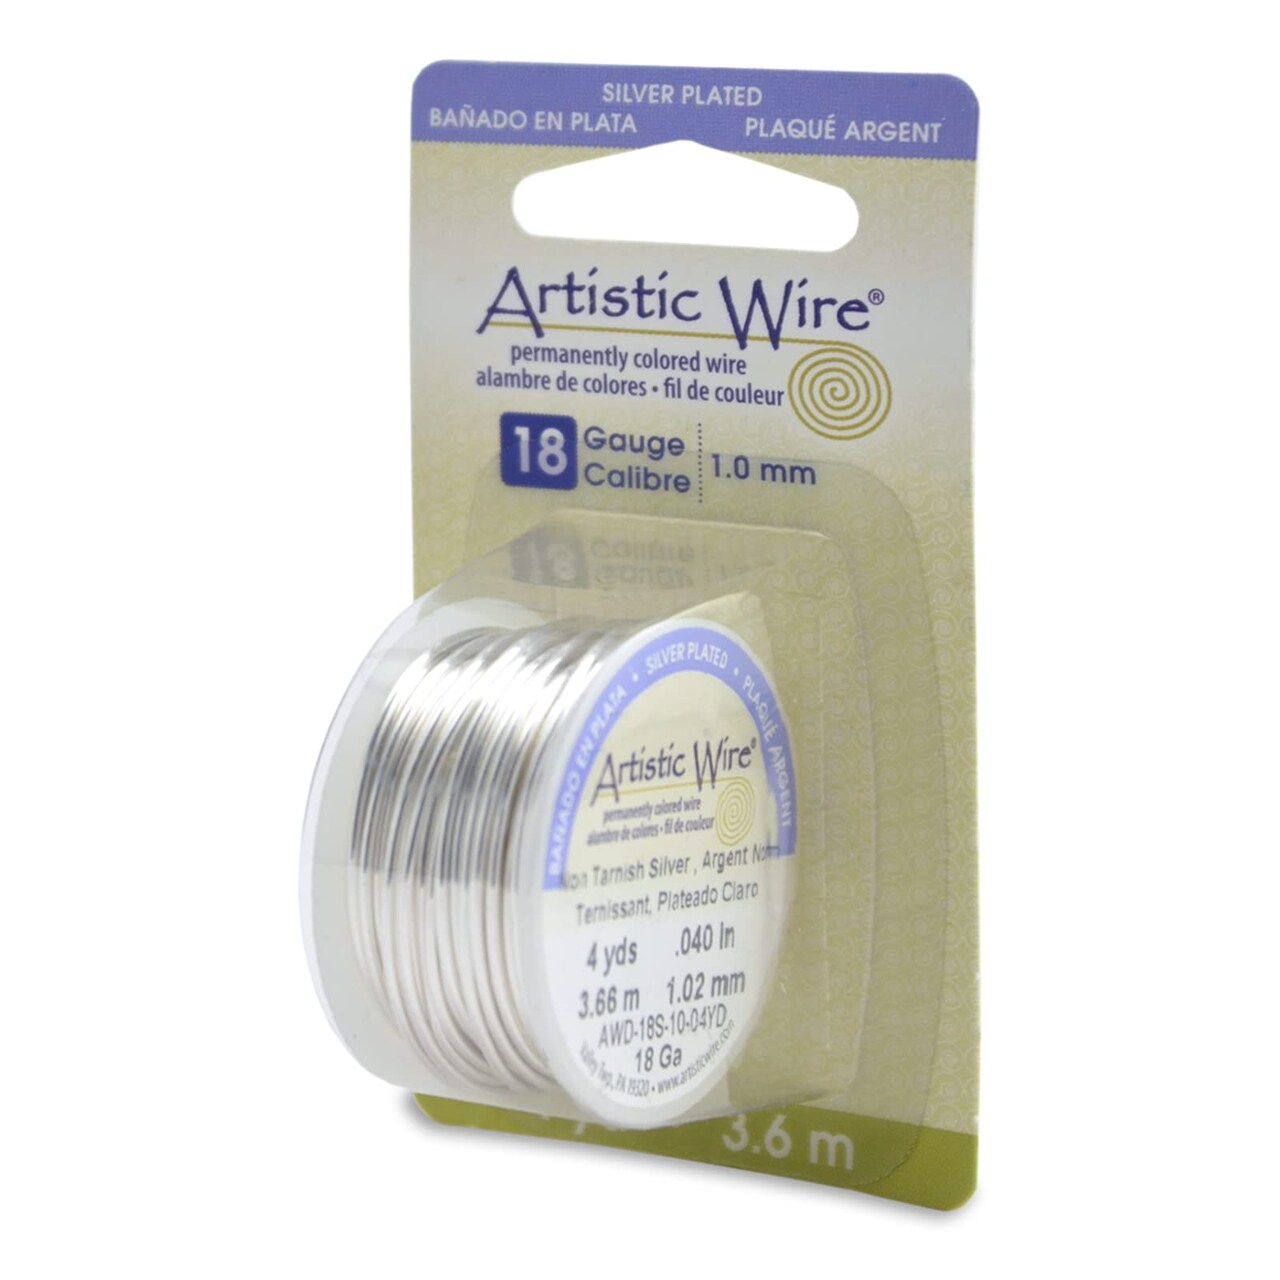 Artistic Wire Silver Plated Wire Dispenser Pack - 18 20 22 24 26